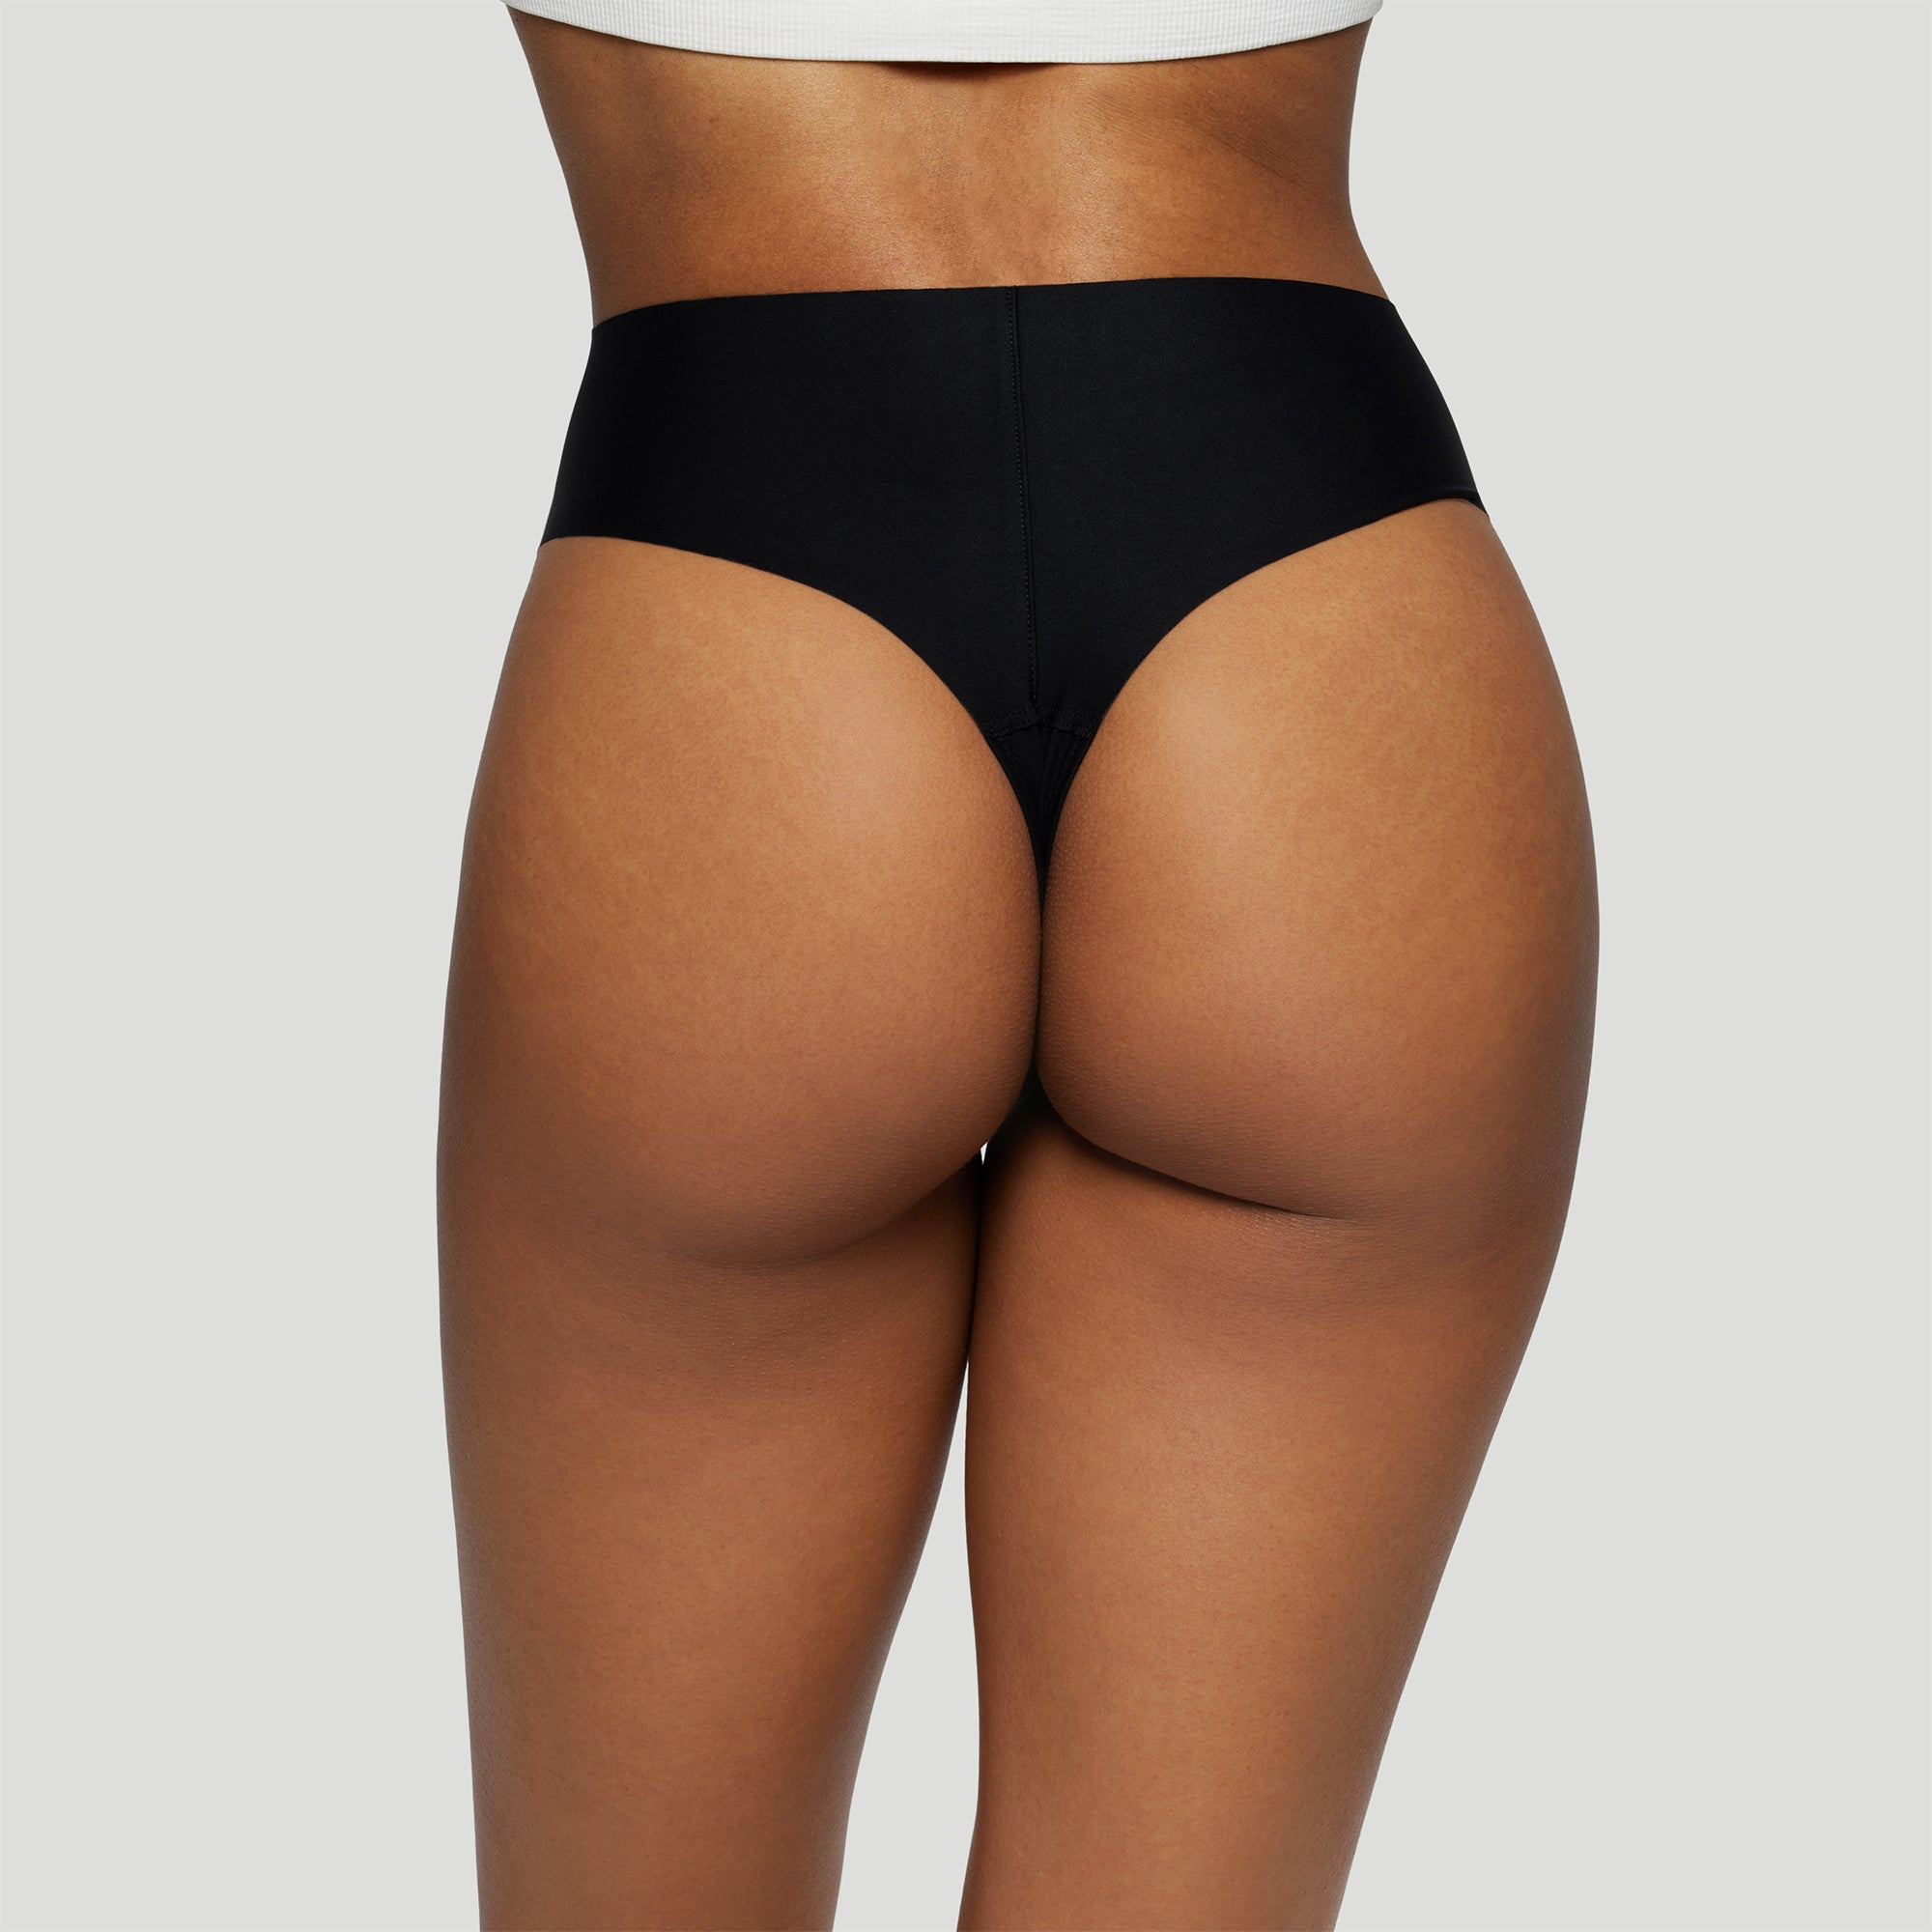 Longhorn Yoga Thong – Luckless Outfitters